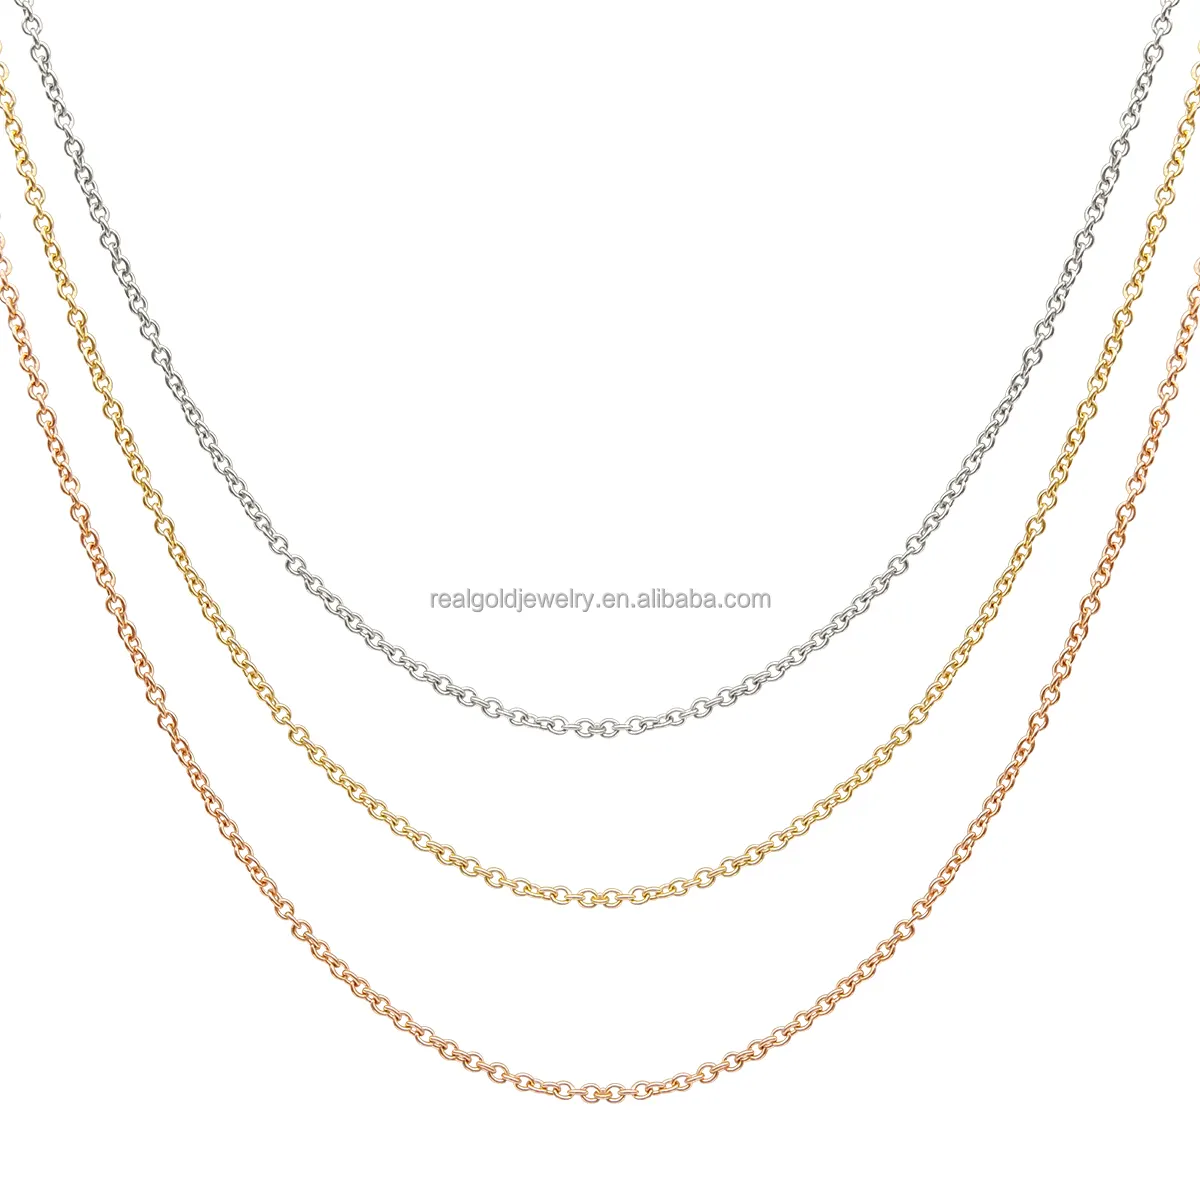 New Arrivals Solid 14K 18K Real Gold 14K Real Gold Thickness 1.0mm Cable O Chain Necklace Jewelry for Women Gift